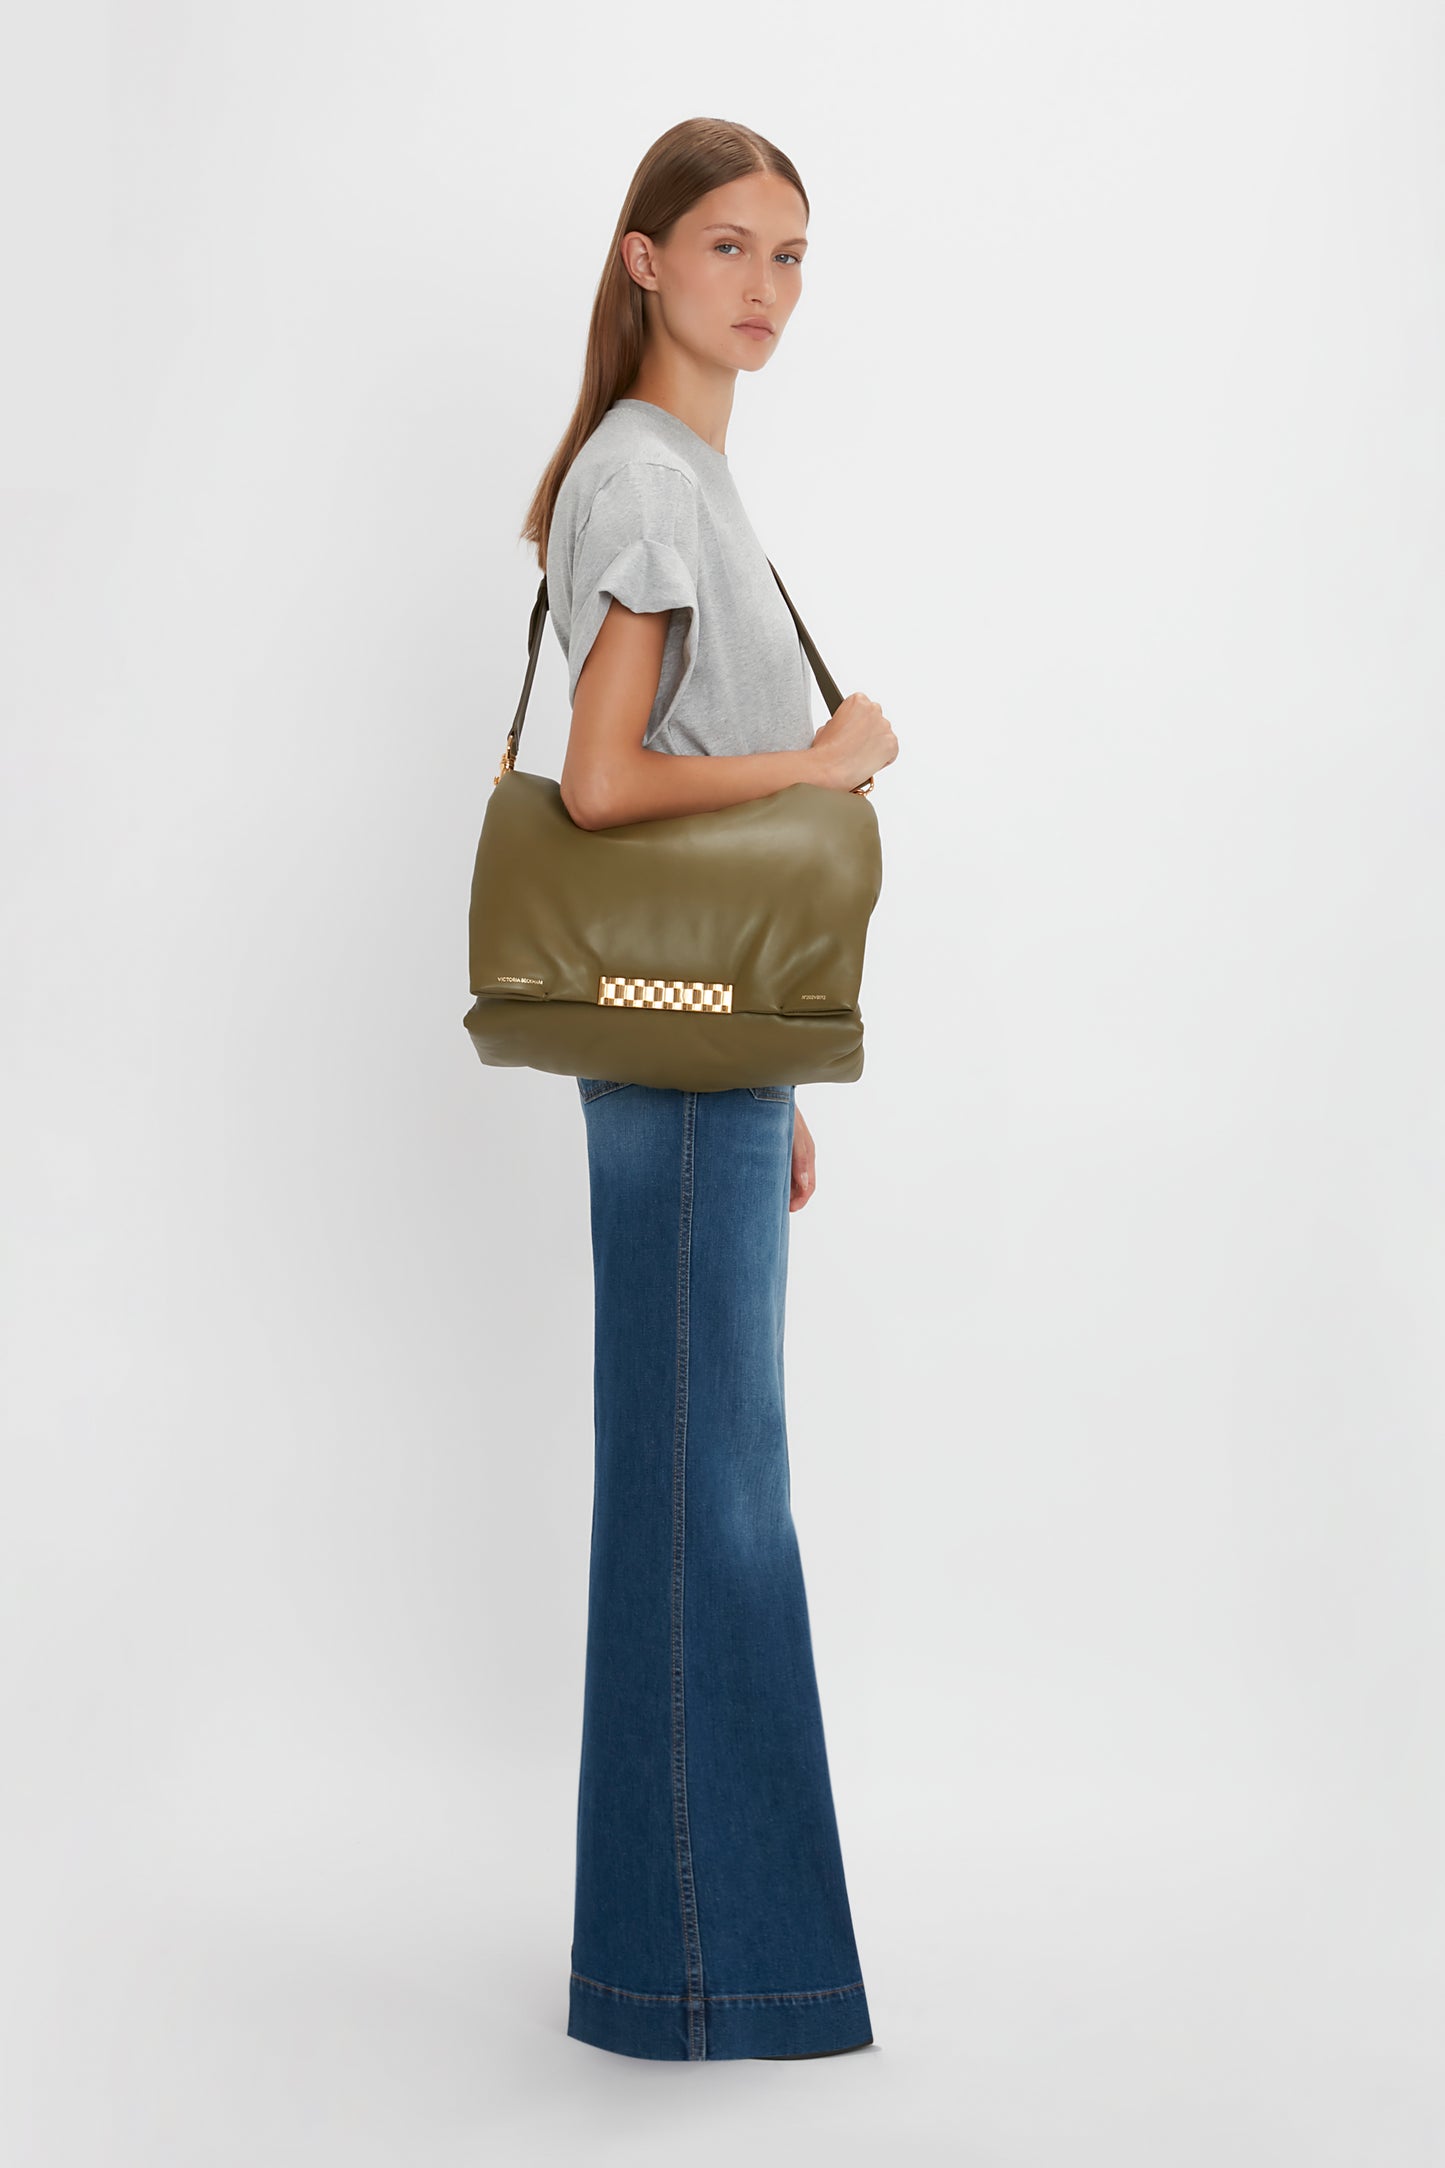 A woman in a Victoria Beckham Asymmetric Relaxed Fit T-Shirt in Grey Marl and blue jeans carrying a large olive green shoulder bag, viewed from the side against a white background.